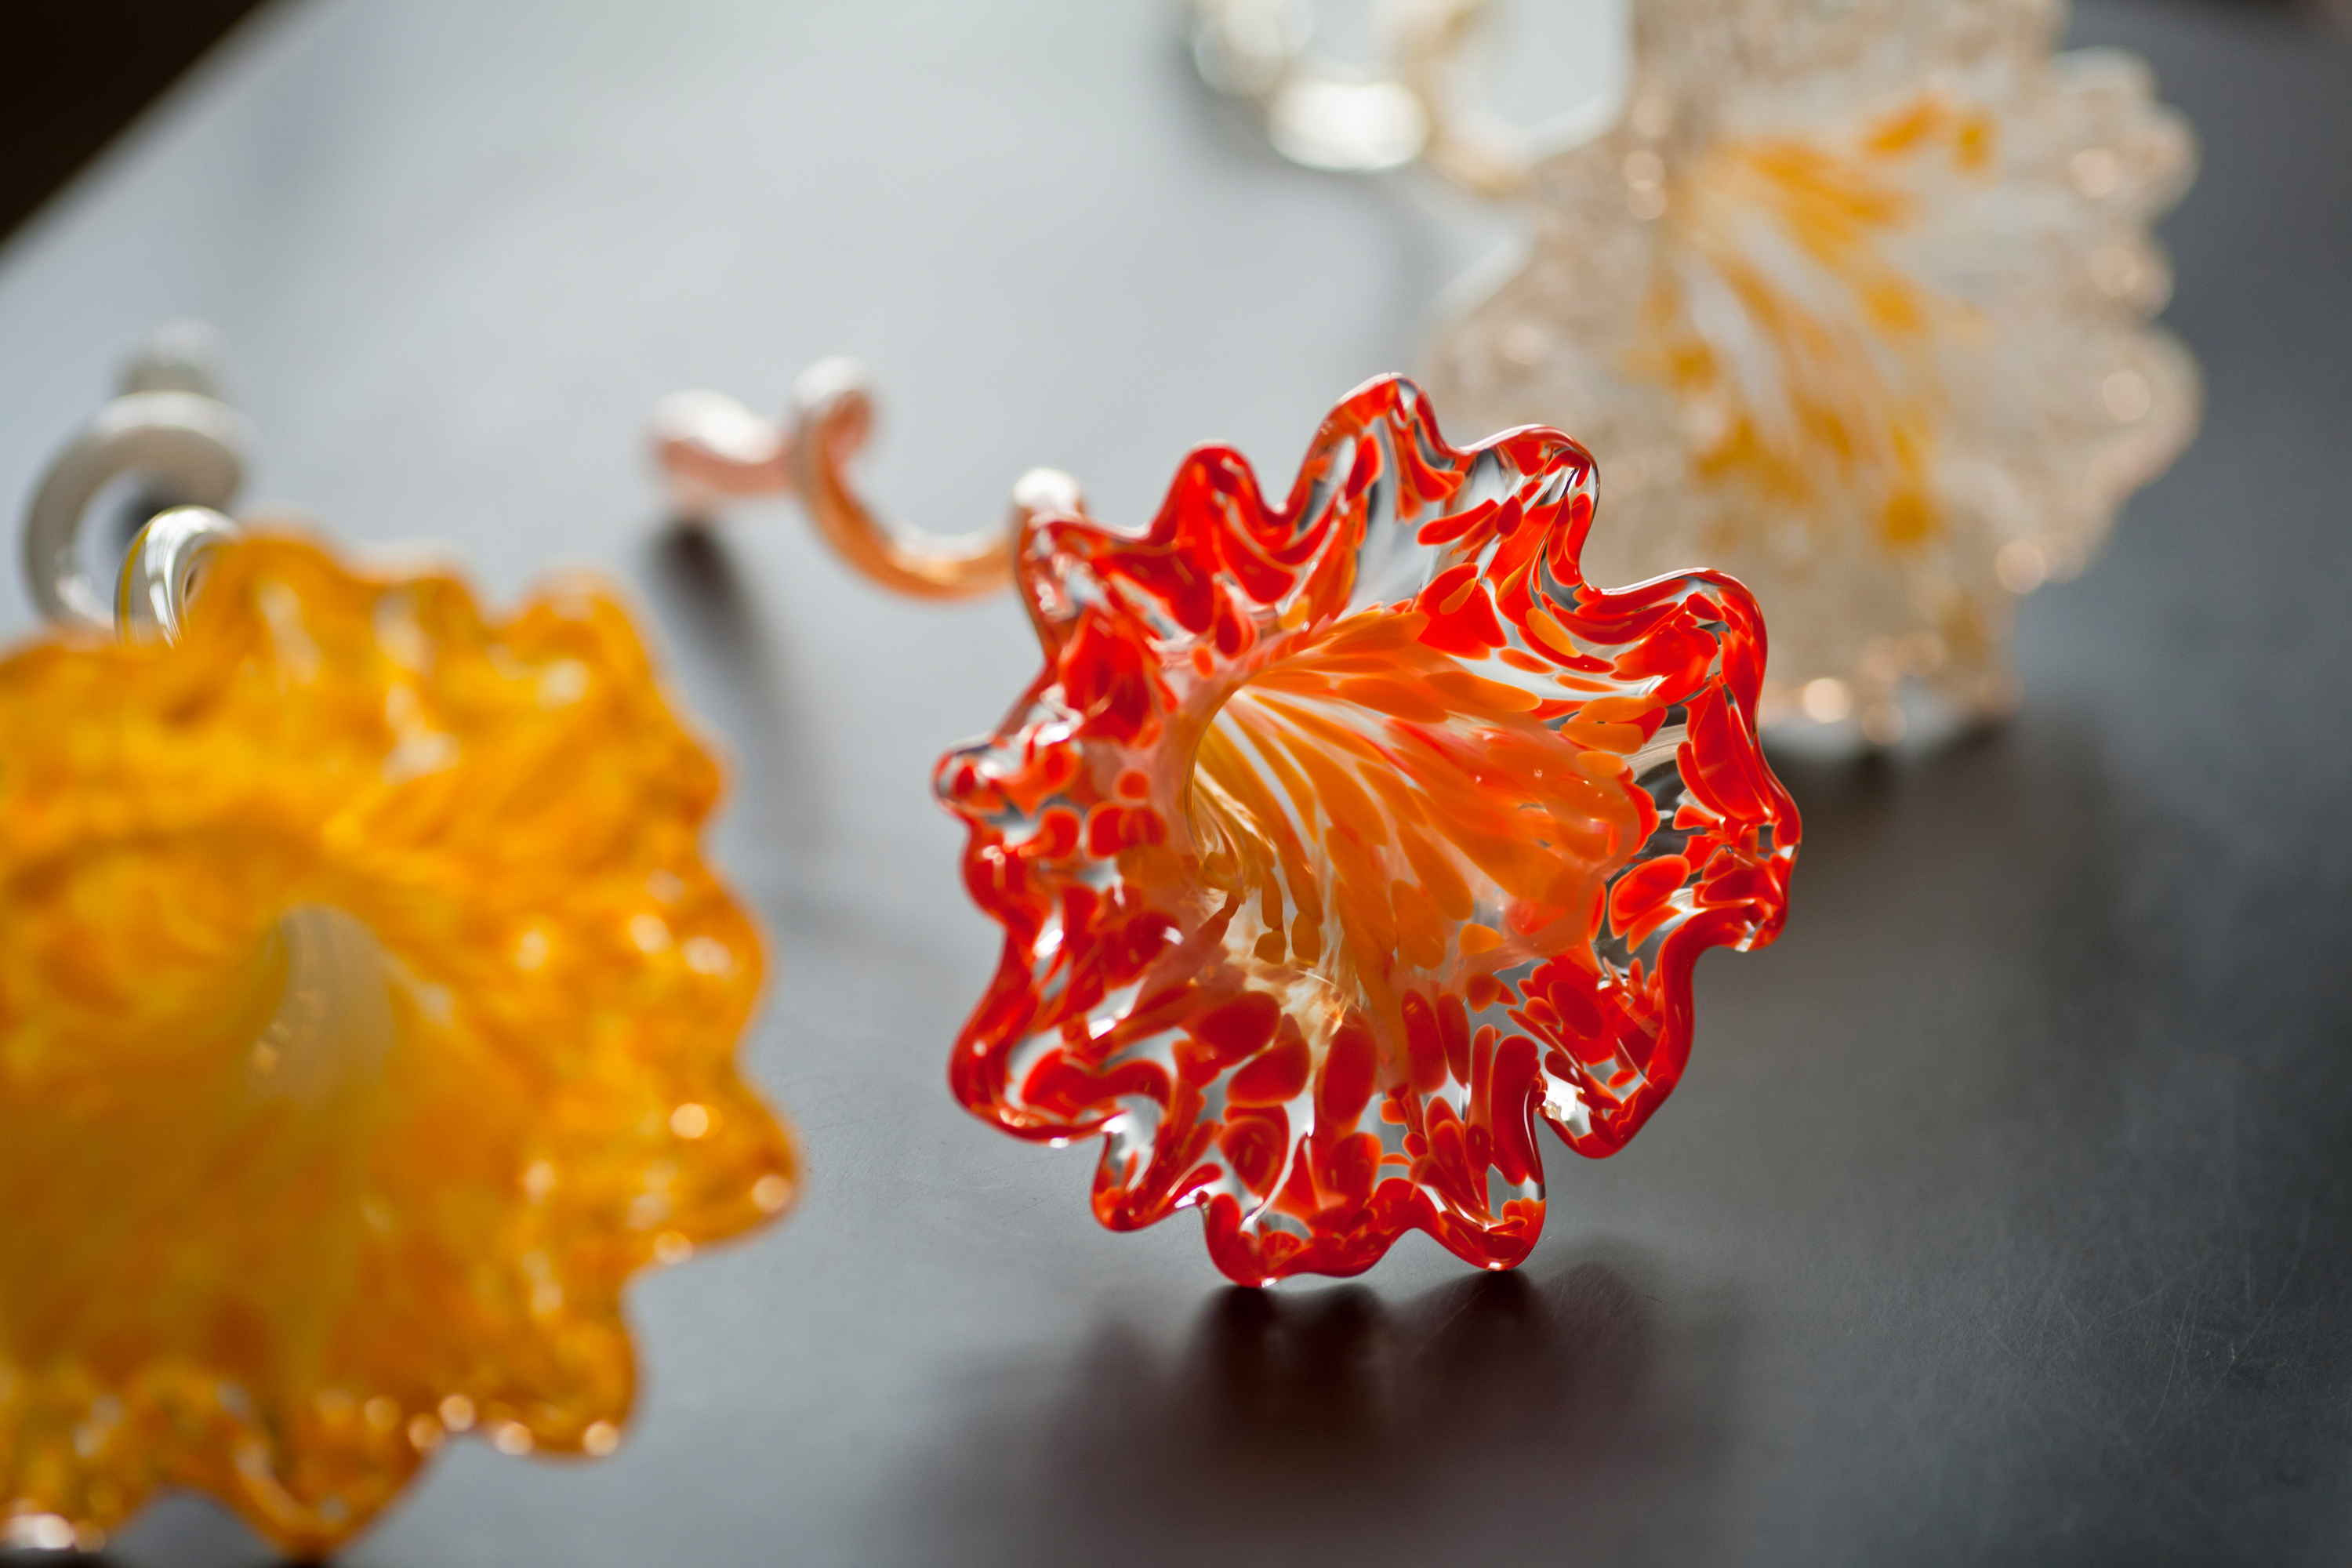 Glass flowers were one of the choices for the Make Your Own Glass experience